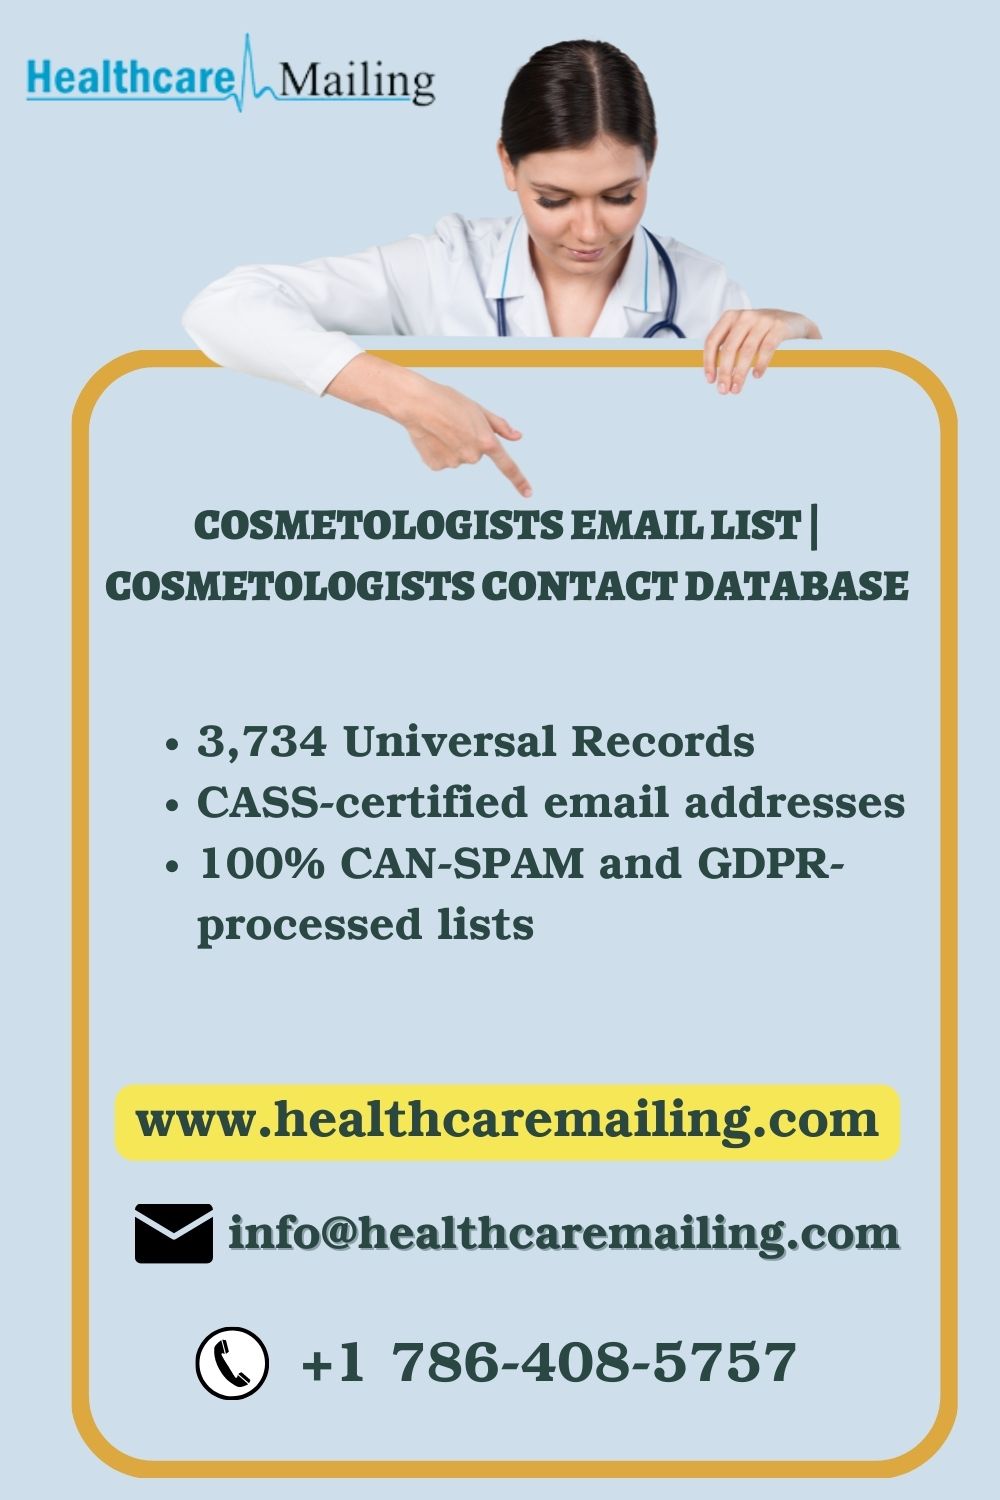 cosmetologist email list-11b57fdf